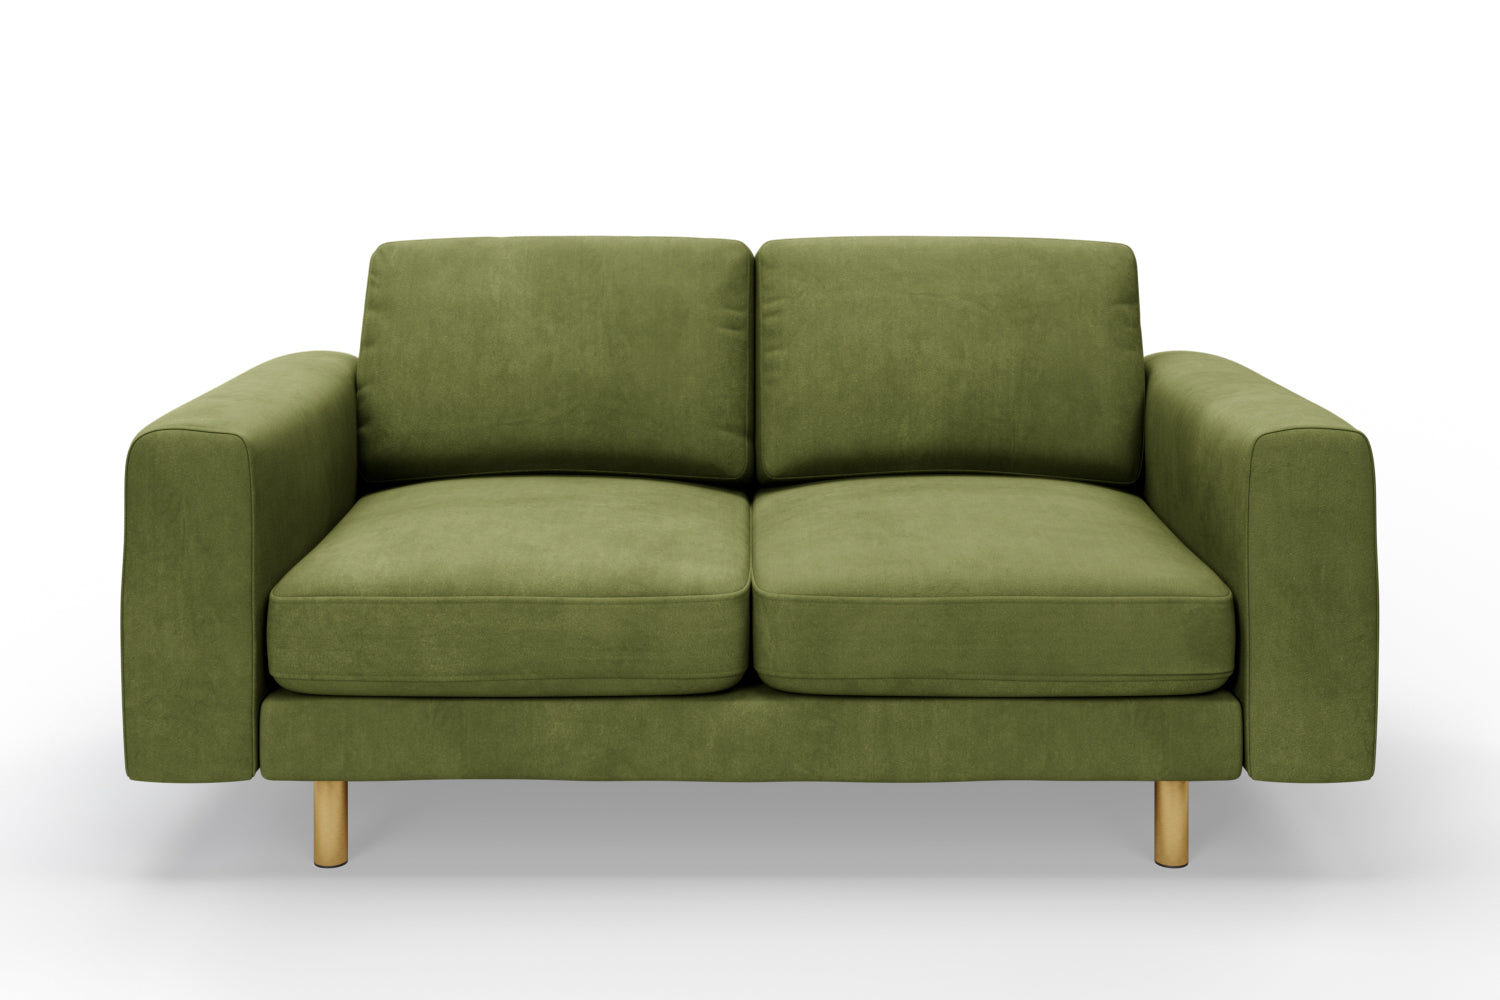 SNUG | The Big Chill 2 Seater Sofa in Olive variant_40414877679664